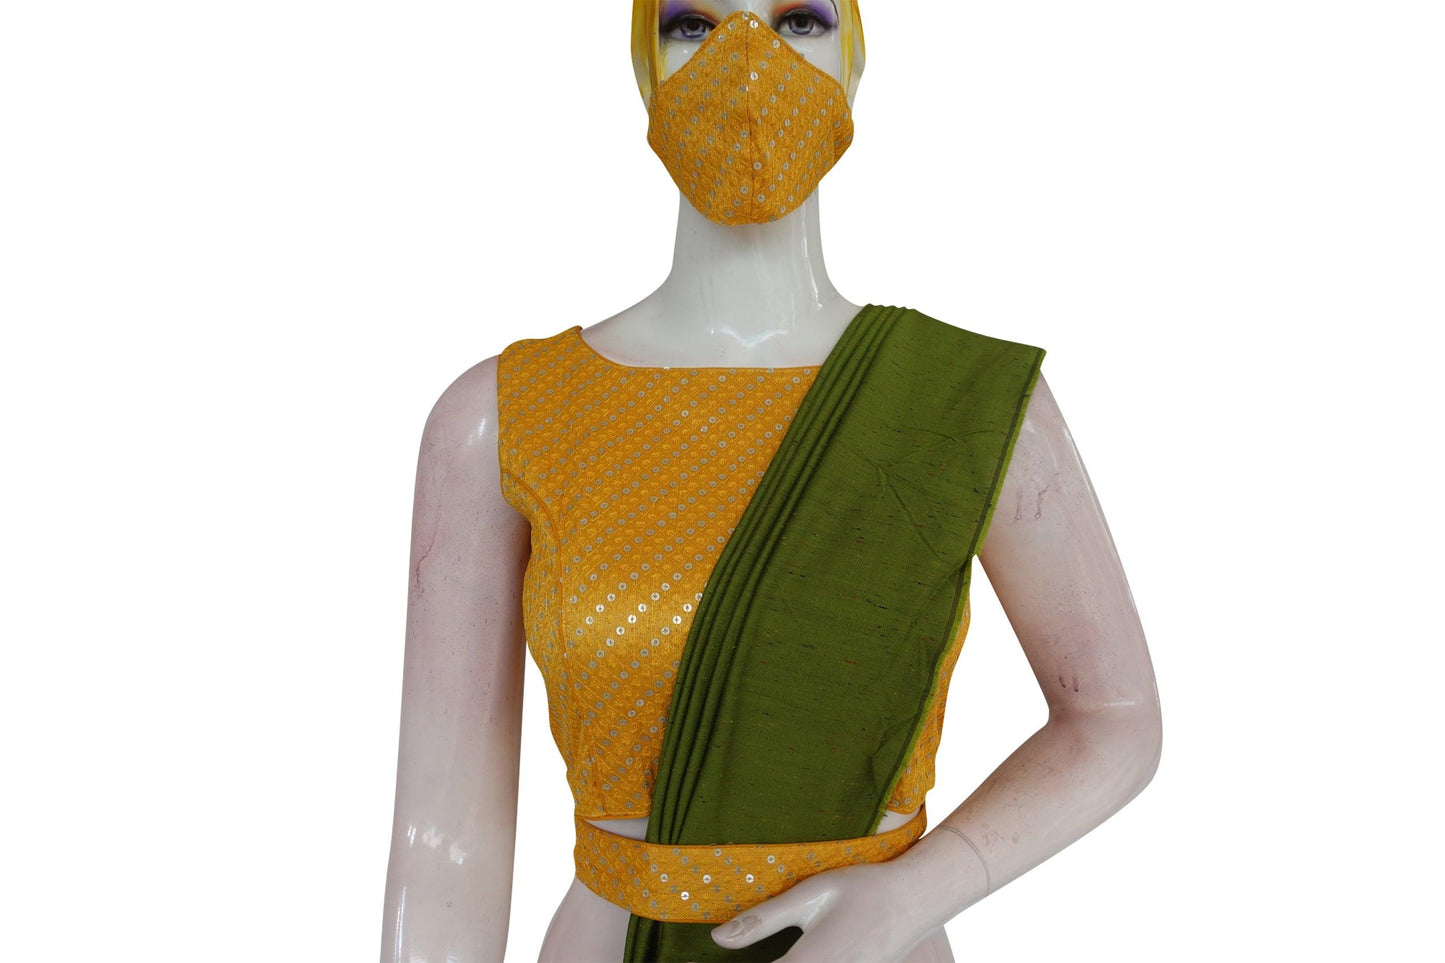 Yellow Color Georgette Sequin Boat neck  Designer Readymade Blouse with Saree Belt